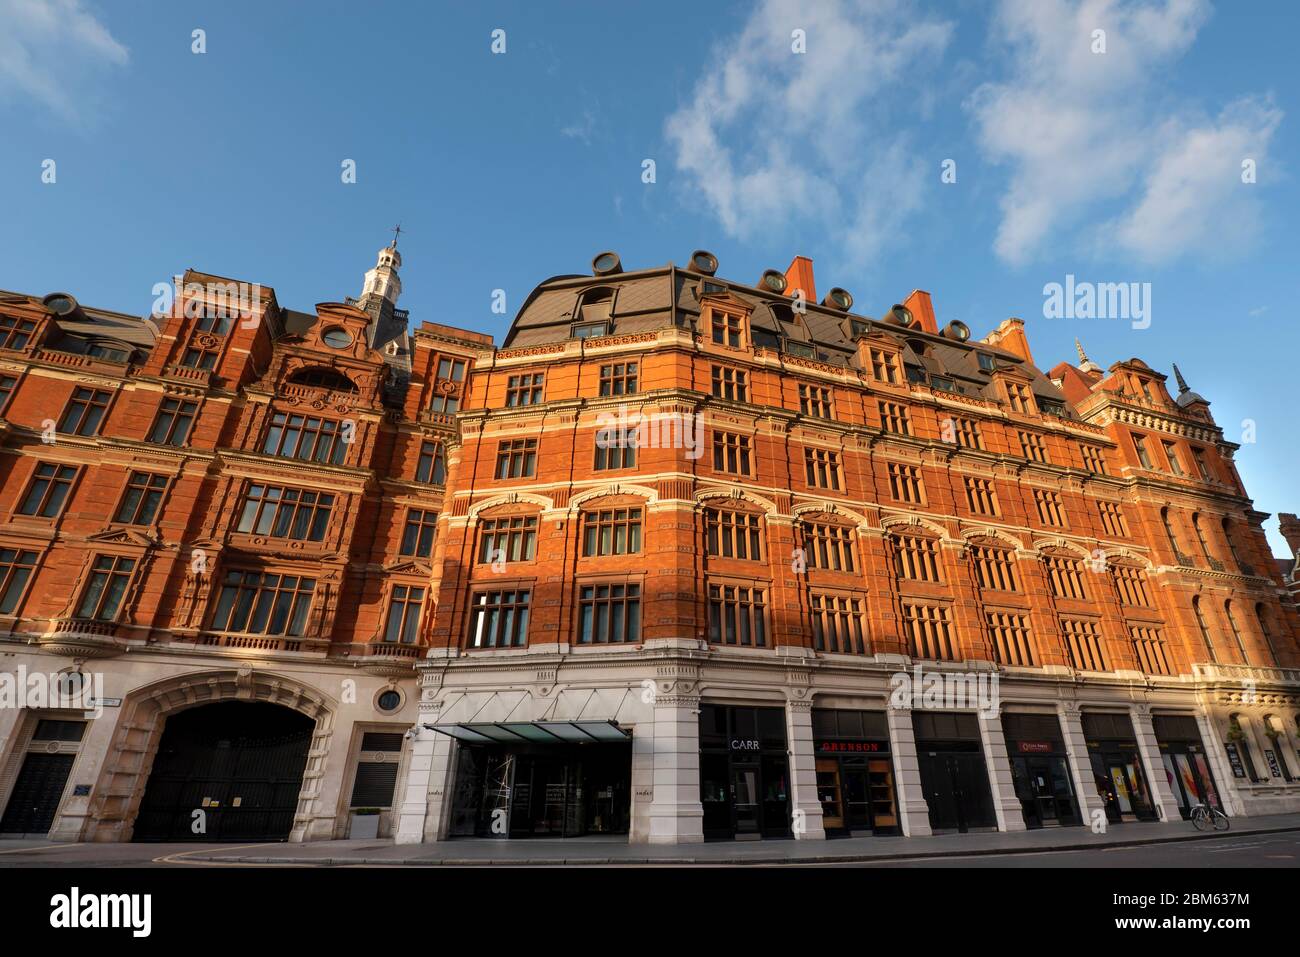 Grade 2 listed heritage building on Liverpool Street is a 5* hotel, formerly Great Eastern Hotel, currently Andaz London, open since 1884. Mar 2020 Stock Photo